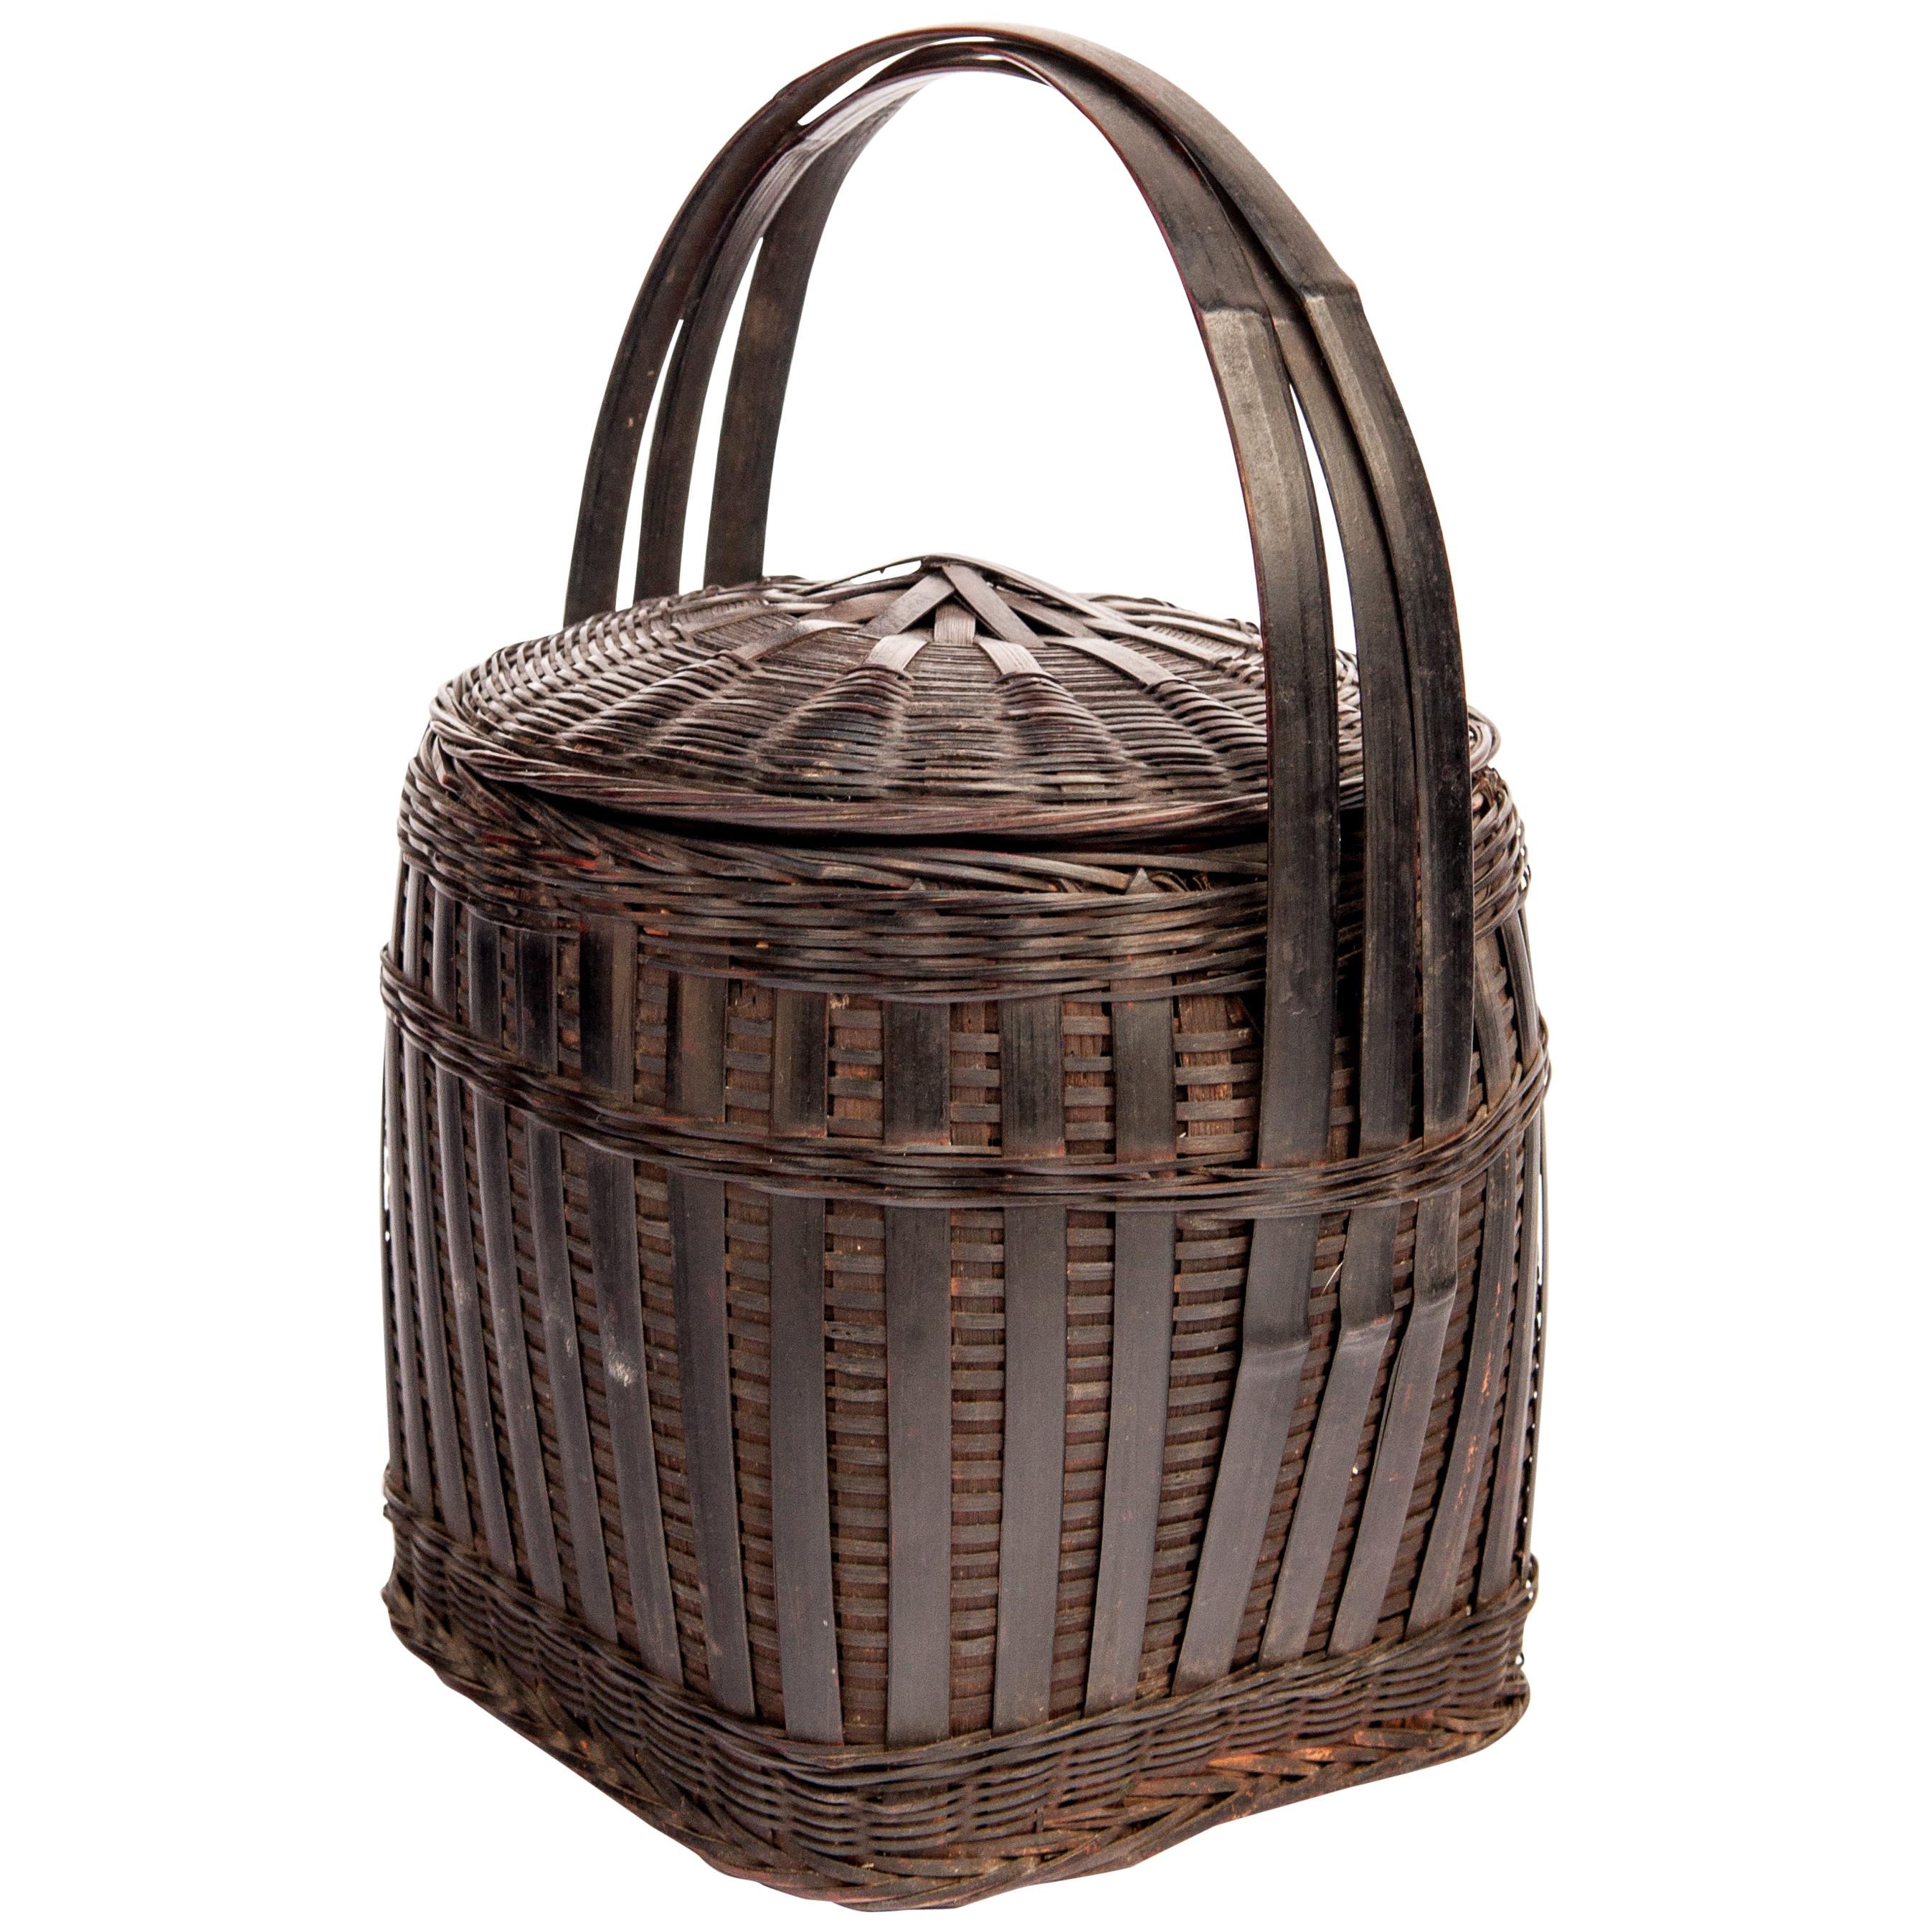 Hmong Storage Basket with Lid and Handle, Guizhou, China, Mid-20th Century